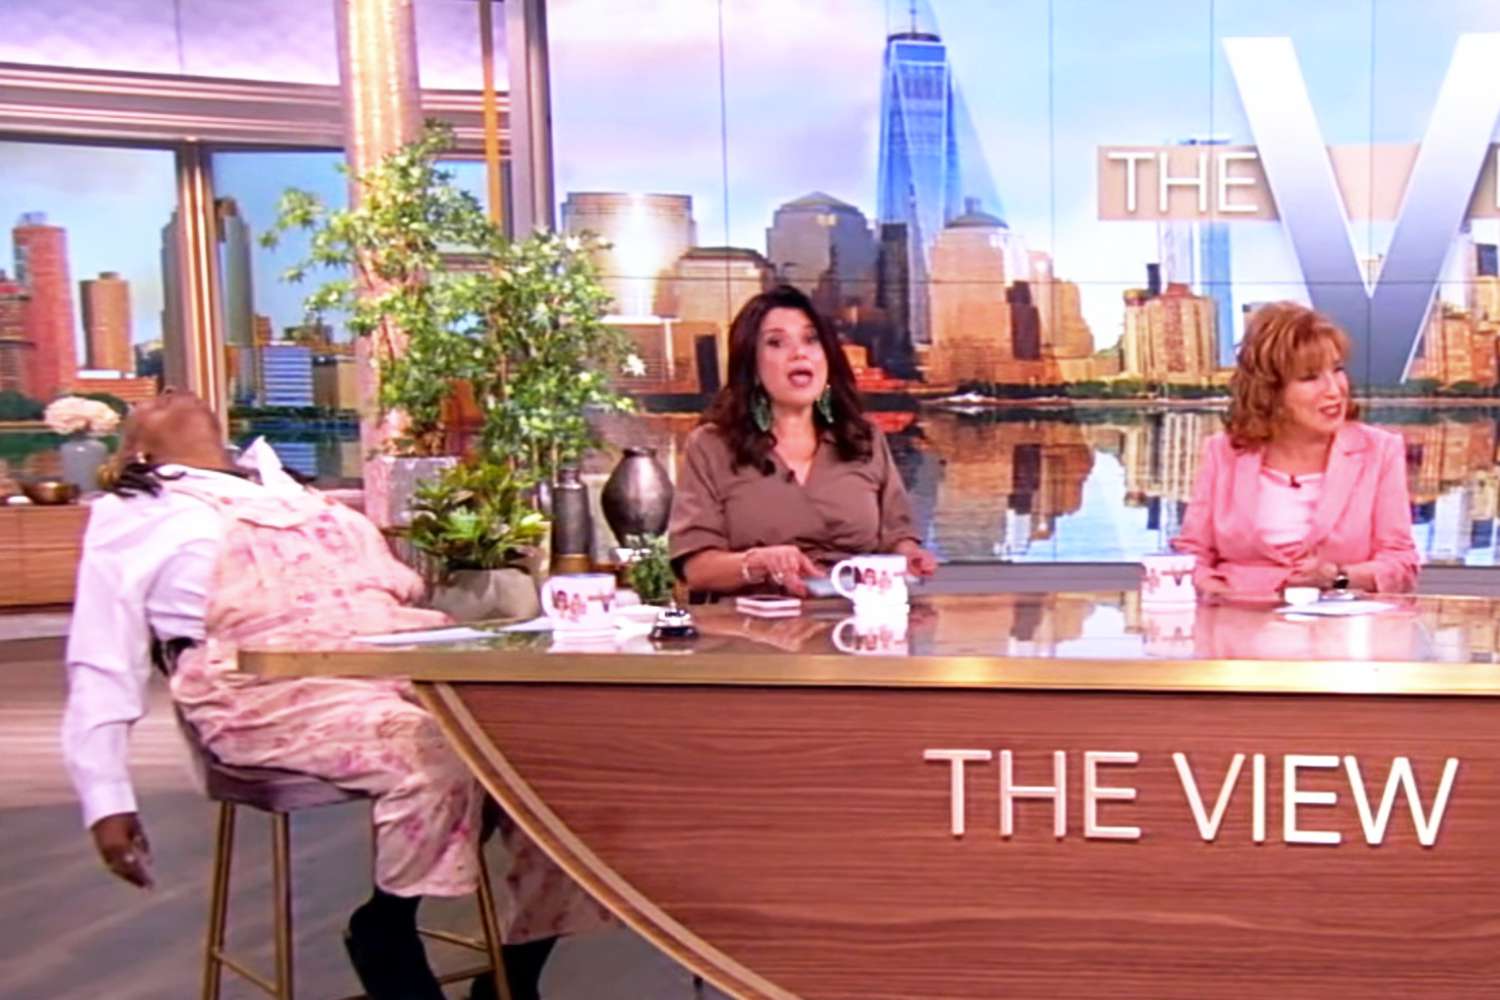 Sara Haines Uses Dramatic Melatonin Demo on ‘The View’ to Highlight Self-Medication Risks